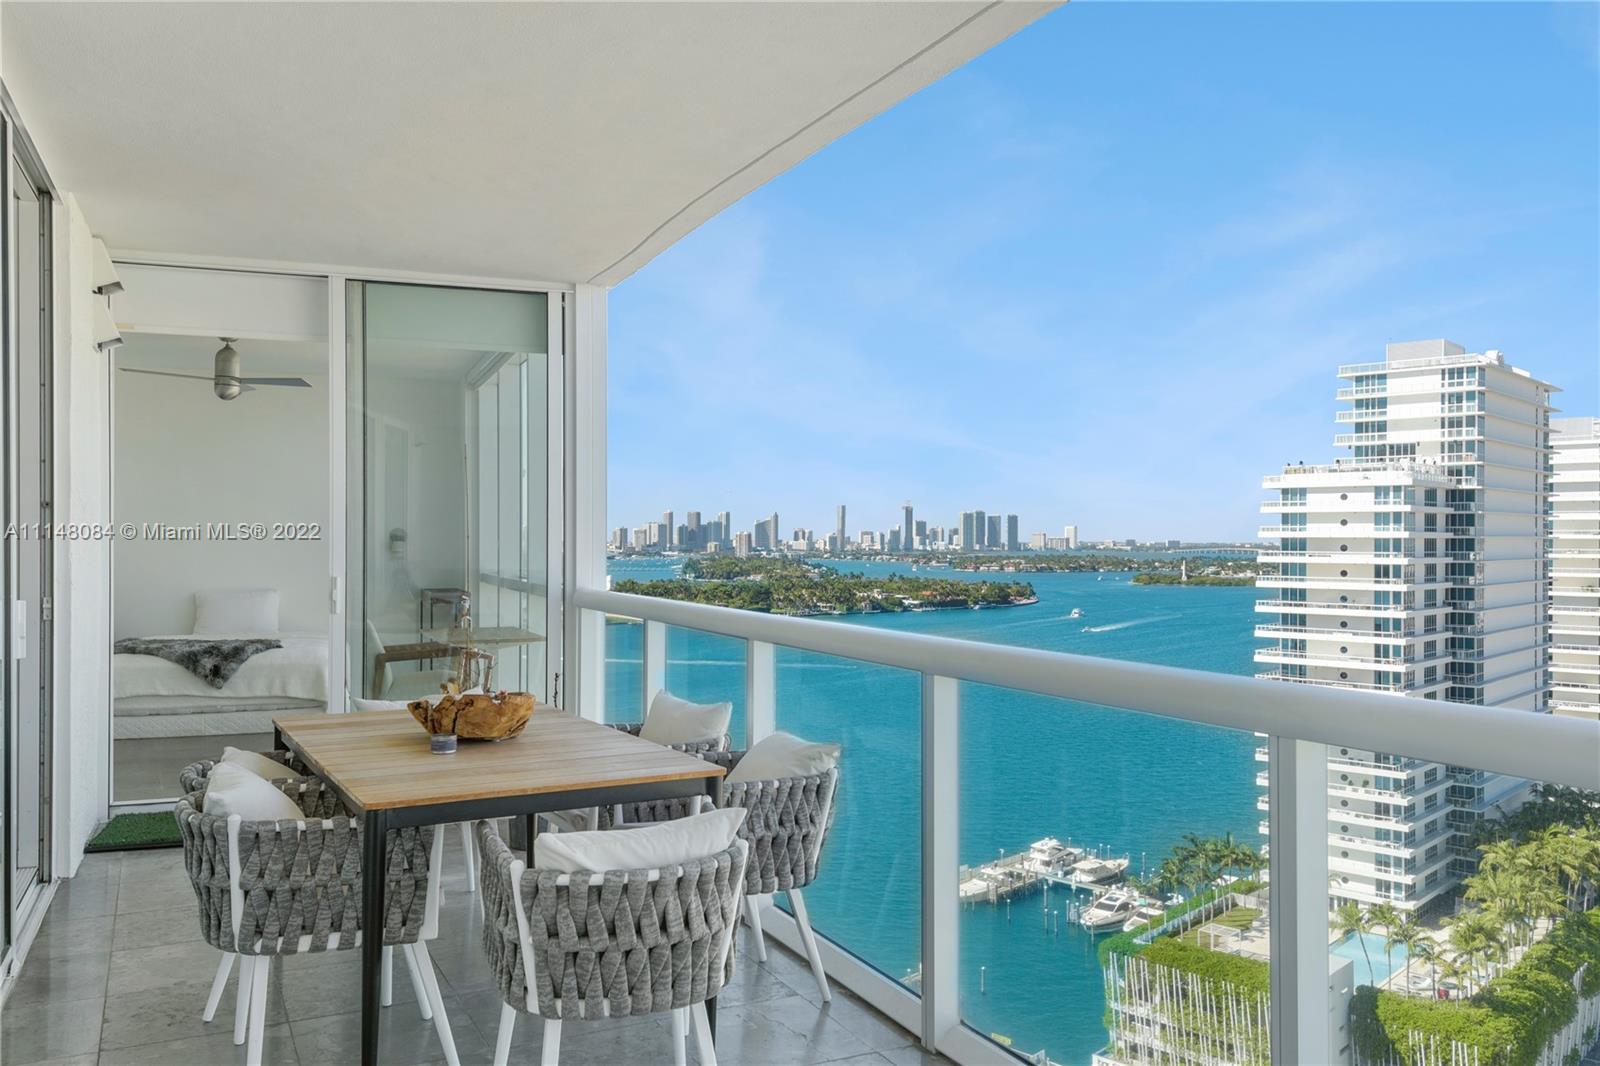 Lovely 2 bedroom/2 bathroom in the prestigious ICON South Beach. Fantastic views, split floor plan, limestone floors, built-in wood closets and more. This full-service building includes two pools, a restaurant, spa services, fitness center, 24-hour valet and security.